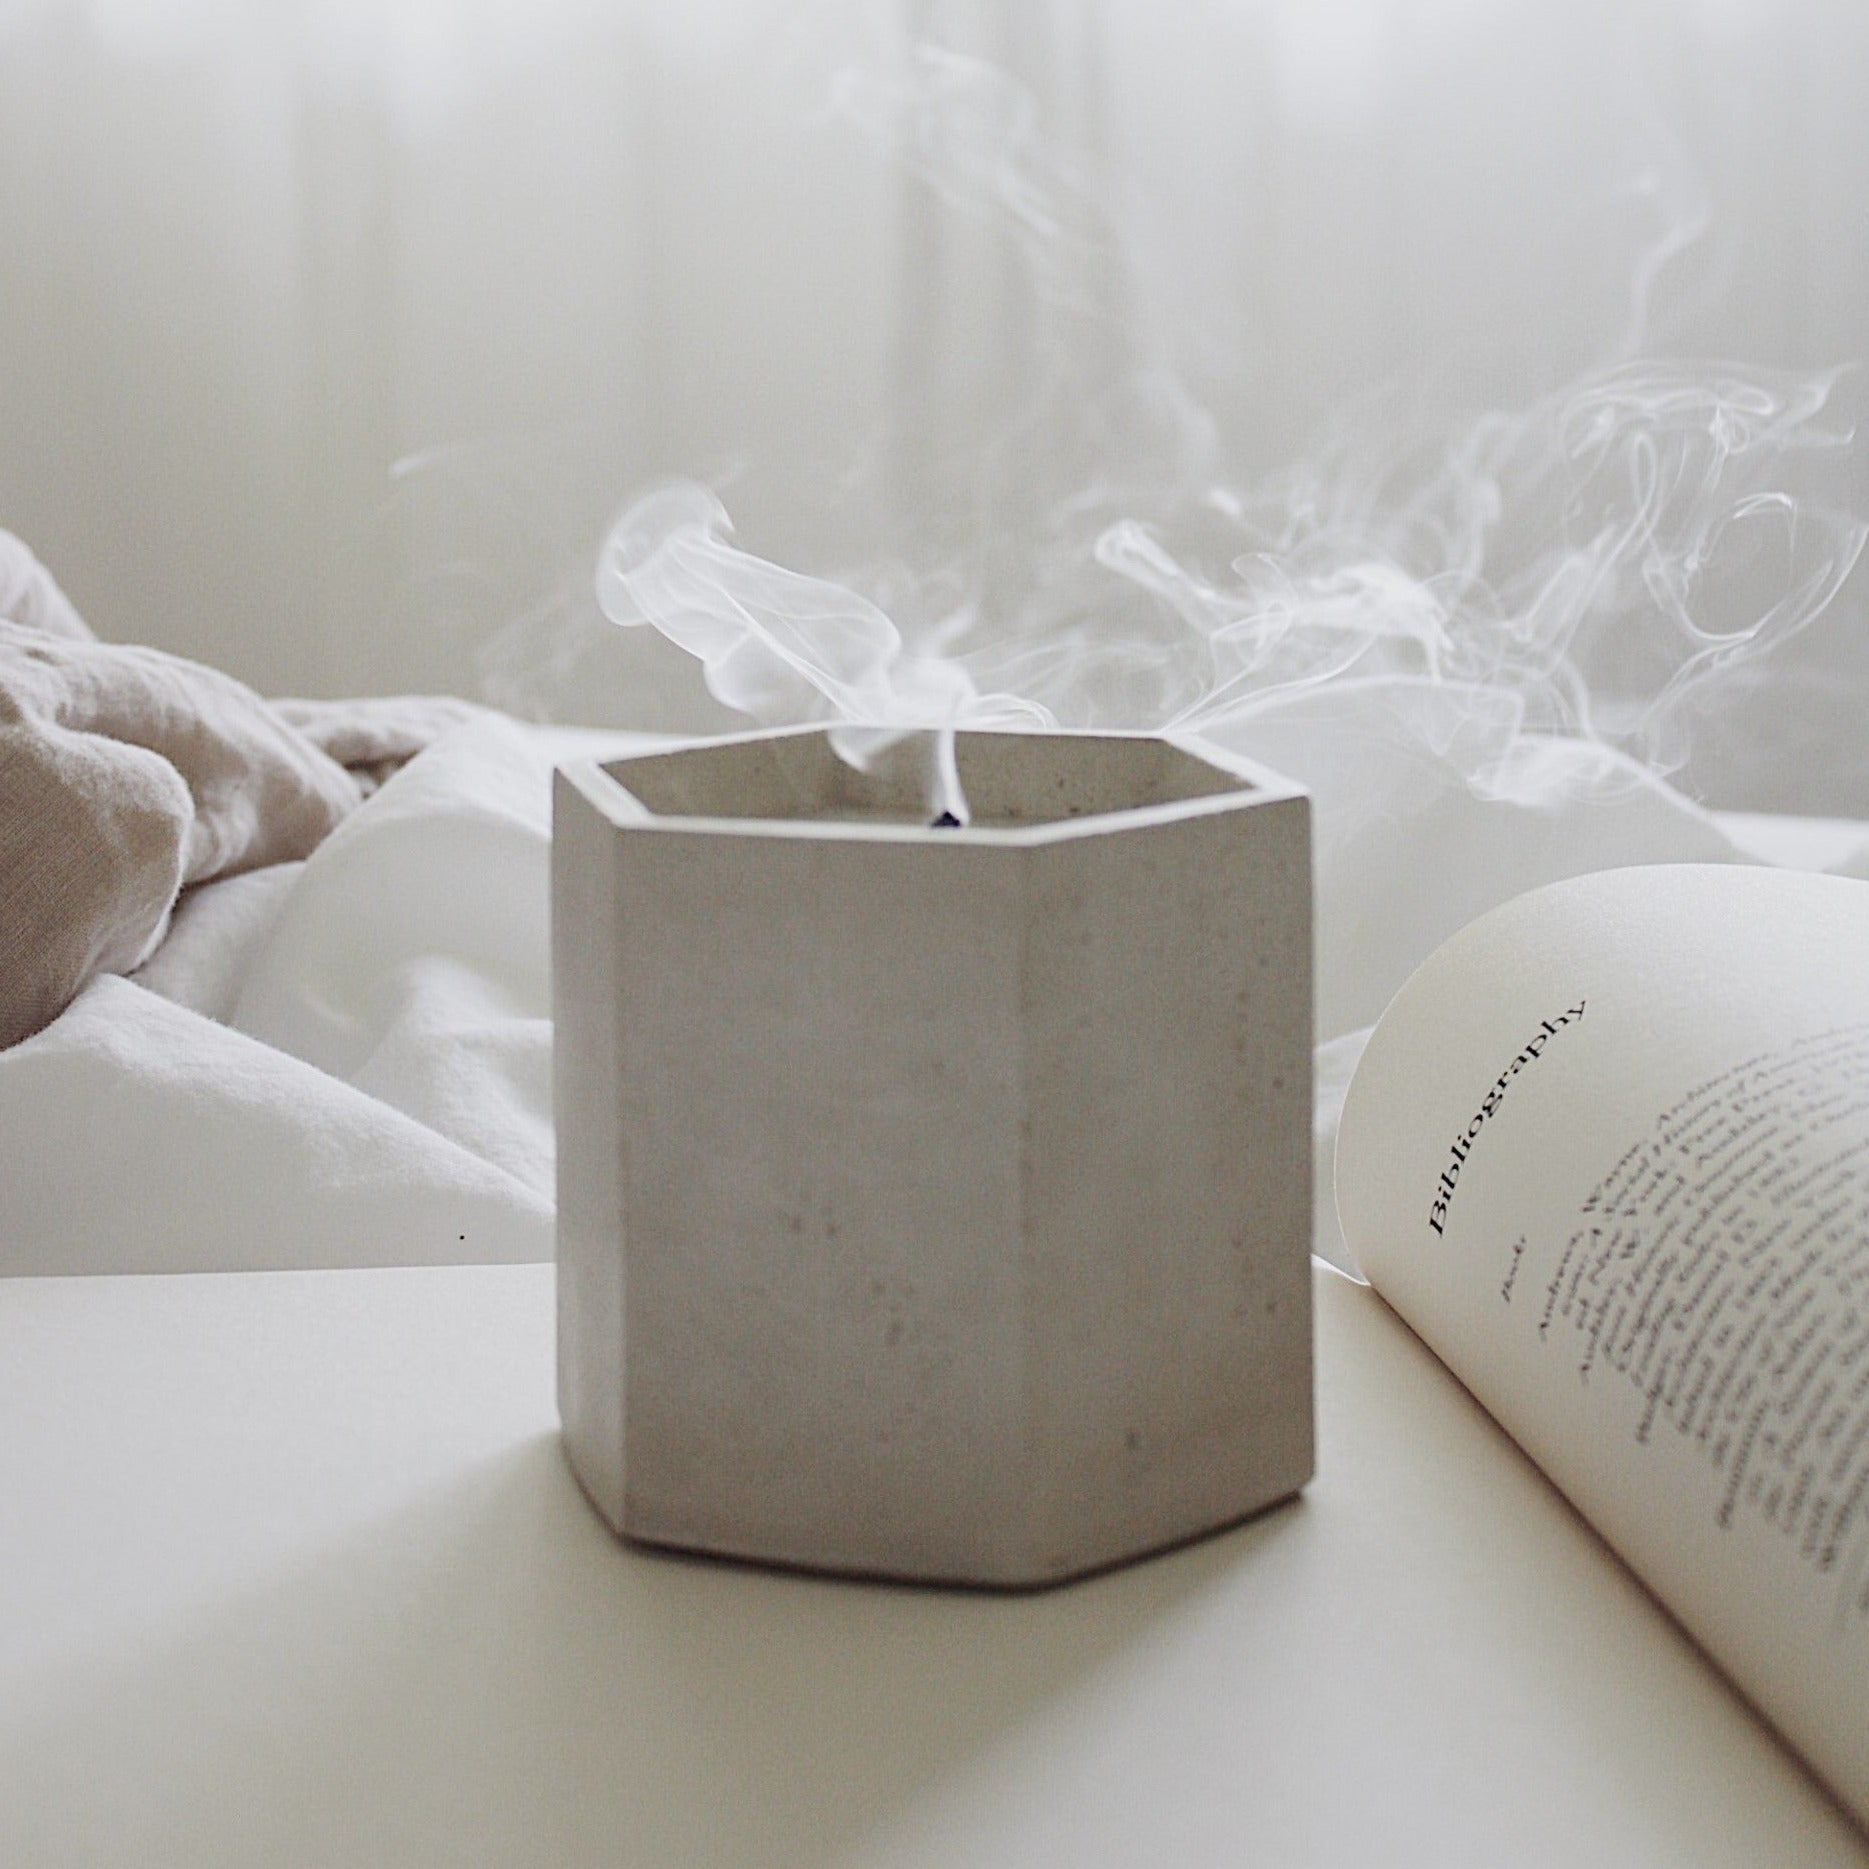 Hexagon white concrete jar with candle sitting on book. Candle wick is smoking. Made by Paige Soy Candles